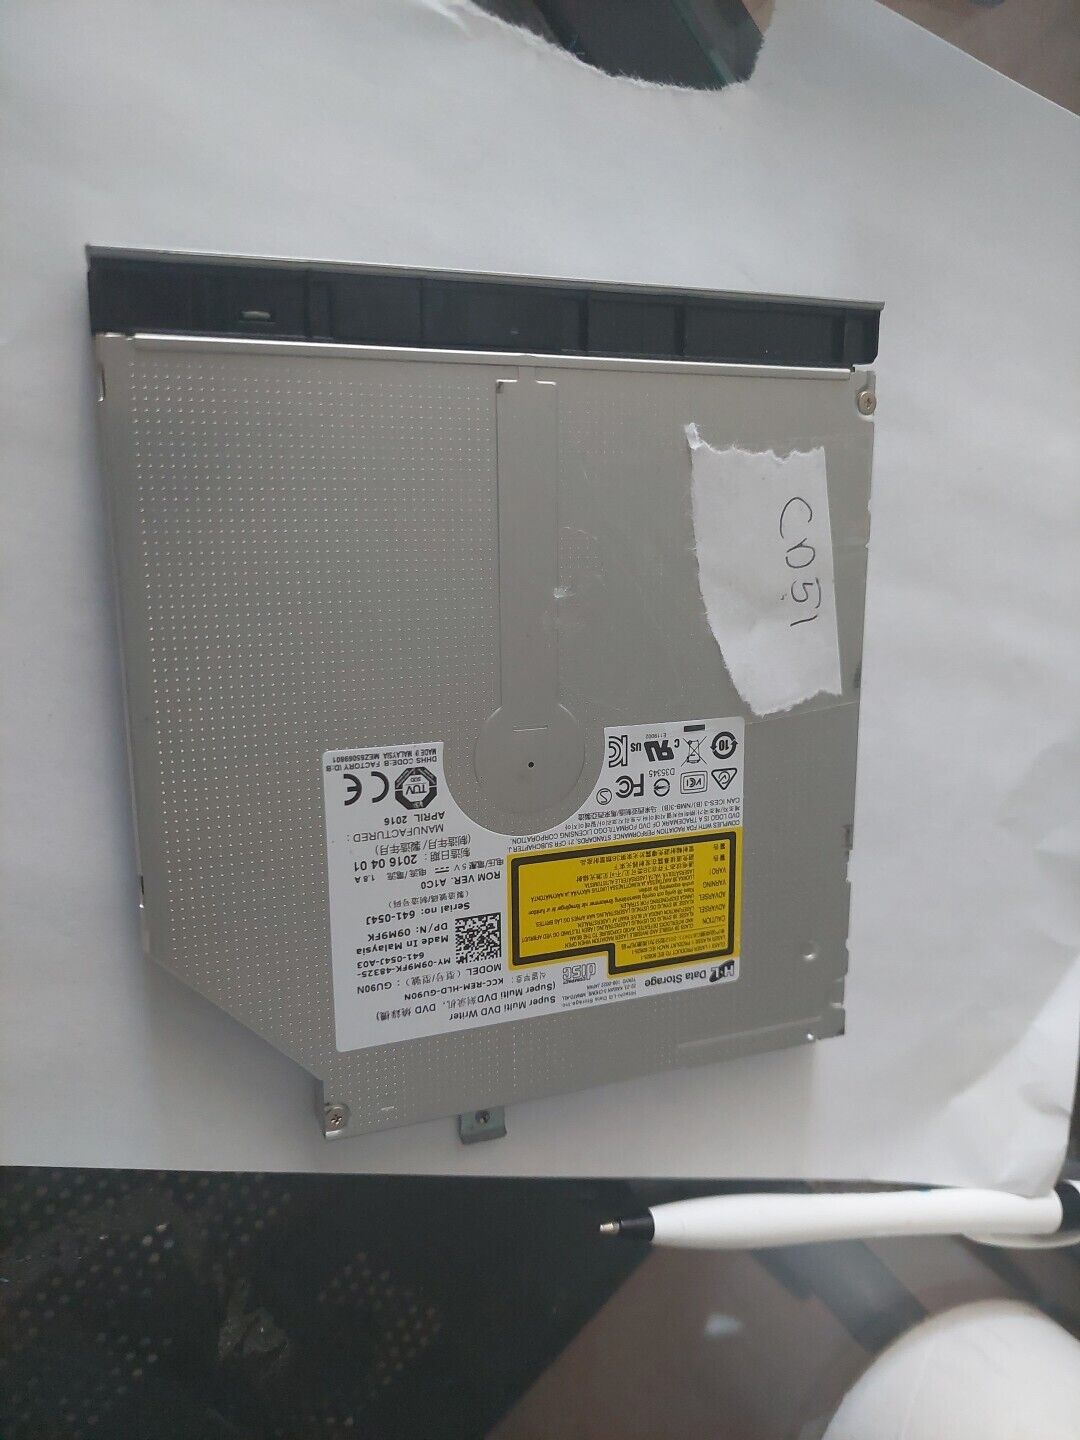 OEM DELL GU90N Super-Multi DVD Writer Replacement Drive (09M9FK) - TESTED